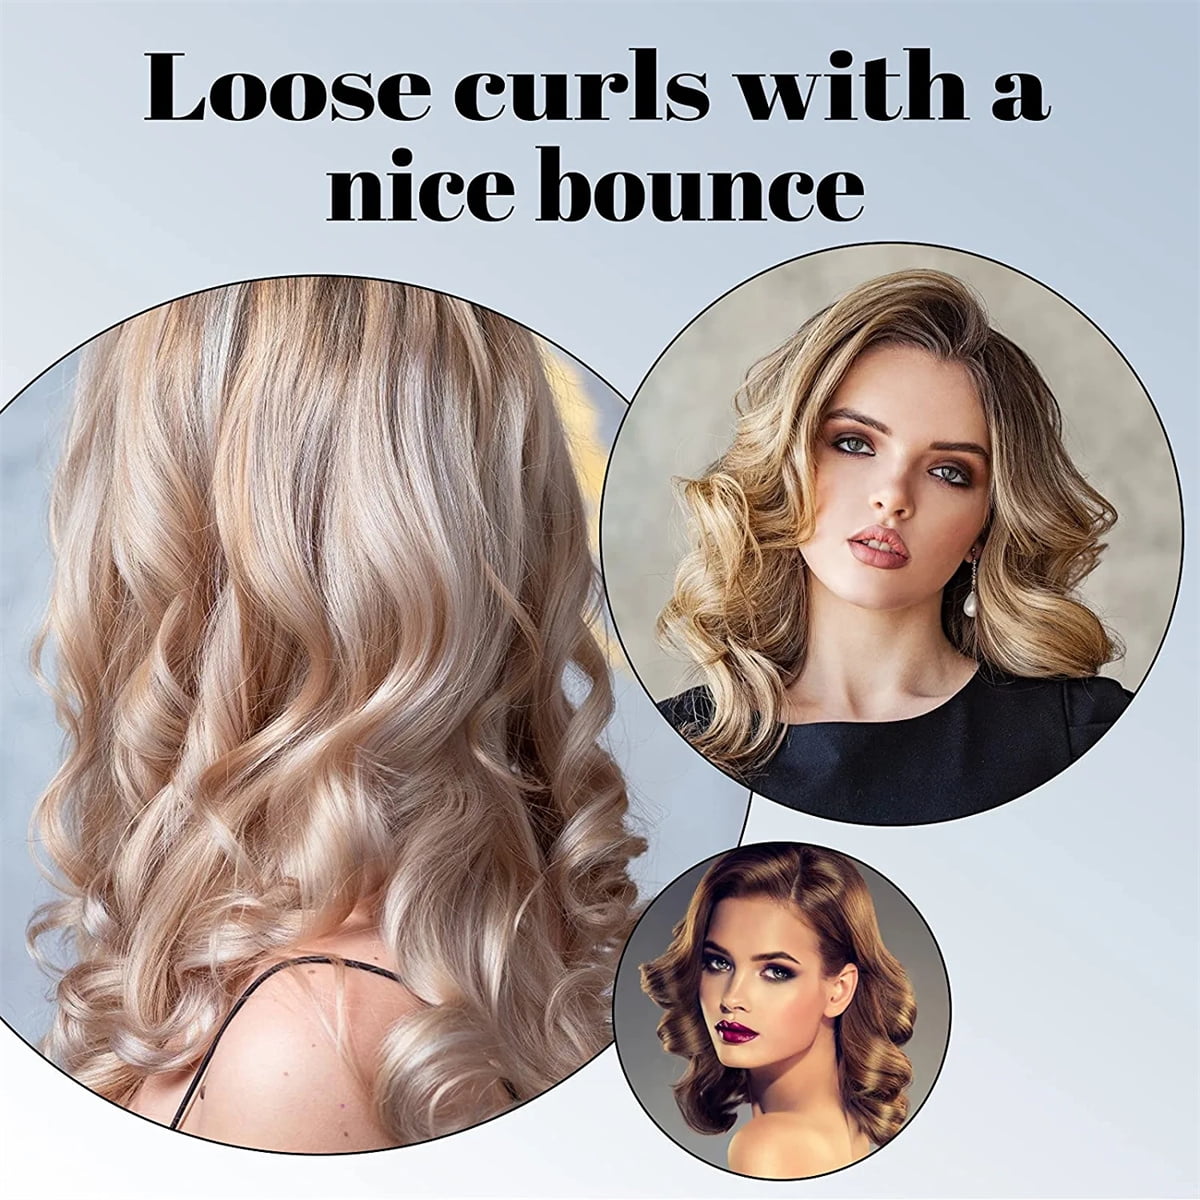 Soft curls wedding hairstyles | Hair for Indian brides | Bridal hairstyles.  | Loose curls hairstyles, Bride hairstyles, Long hair styles